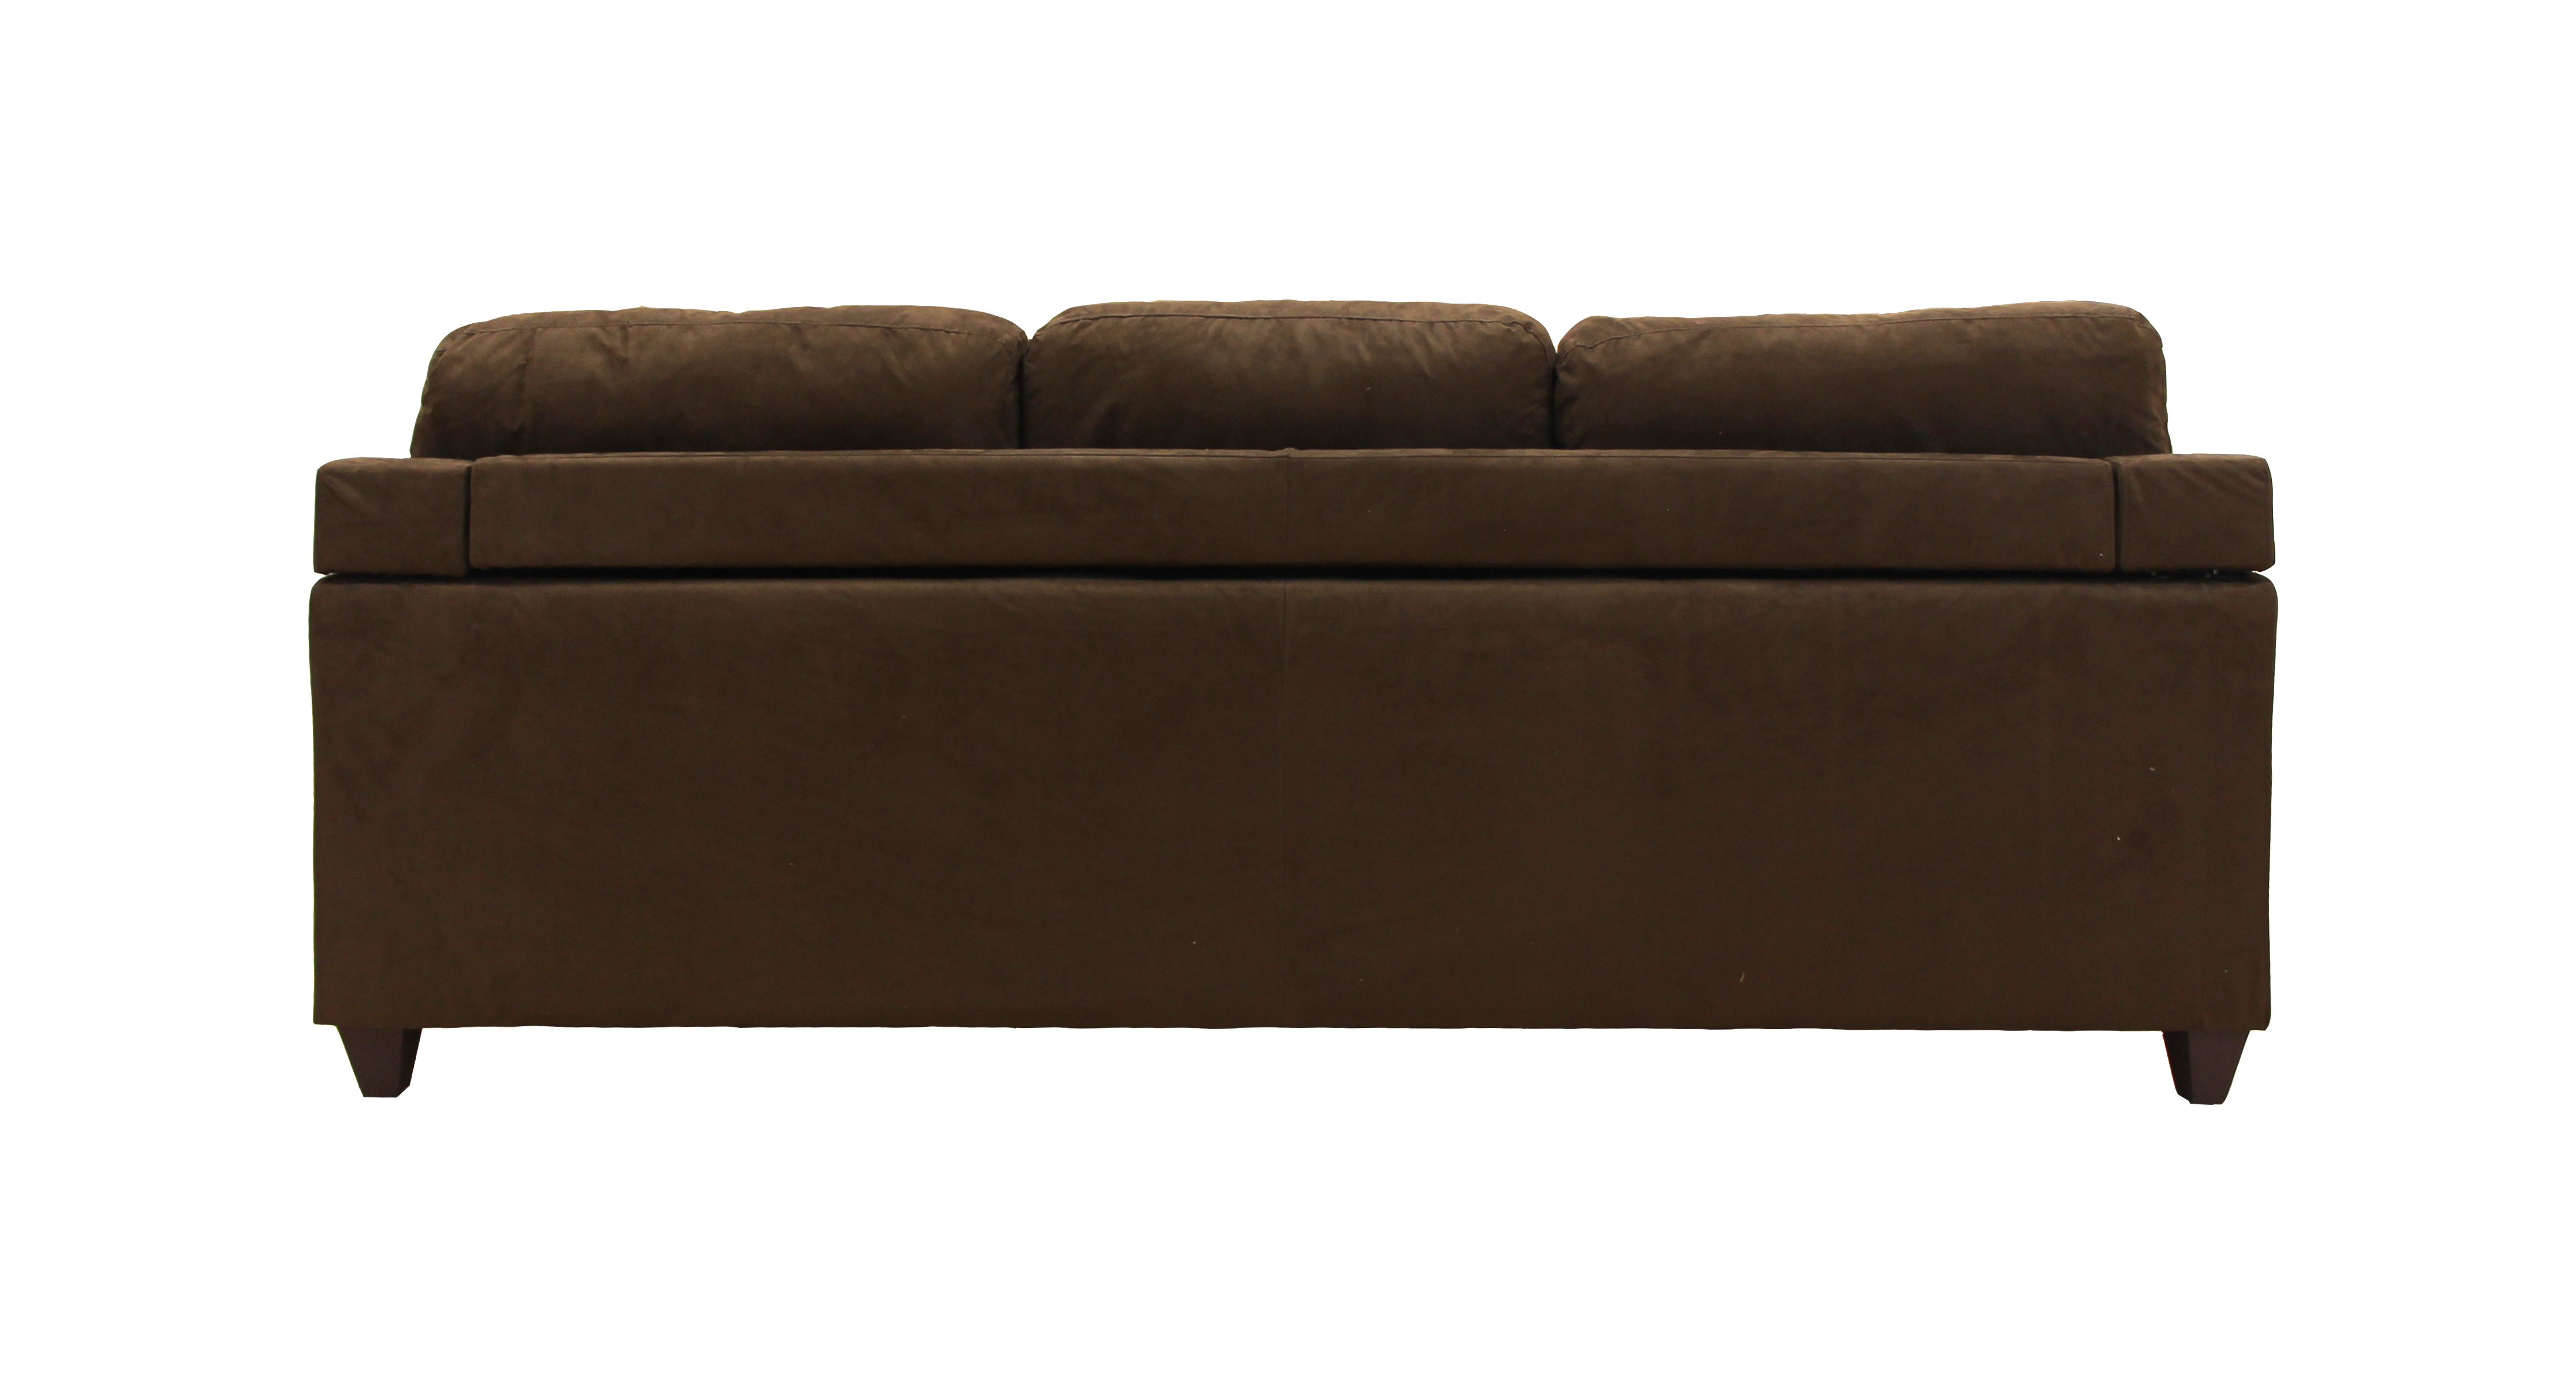 Acme Vogue Microfiber Reversible Chaise Sectional Sofa, Multiple Colors - image 4 of 4